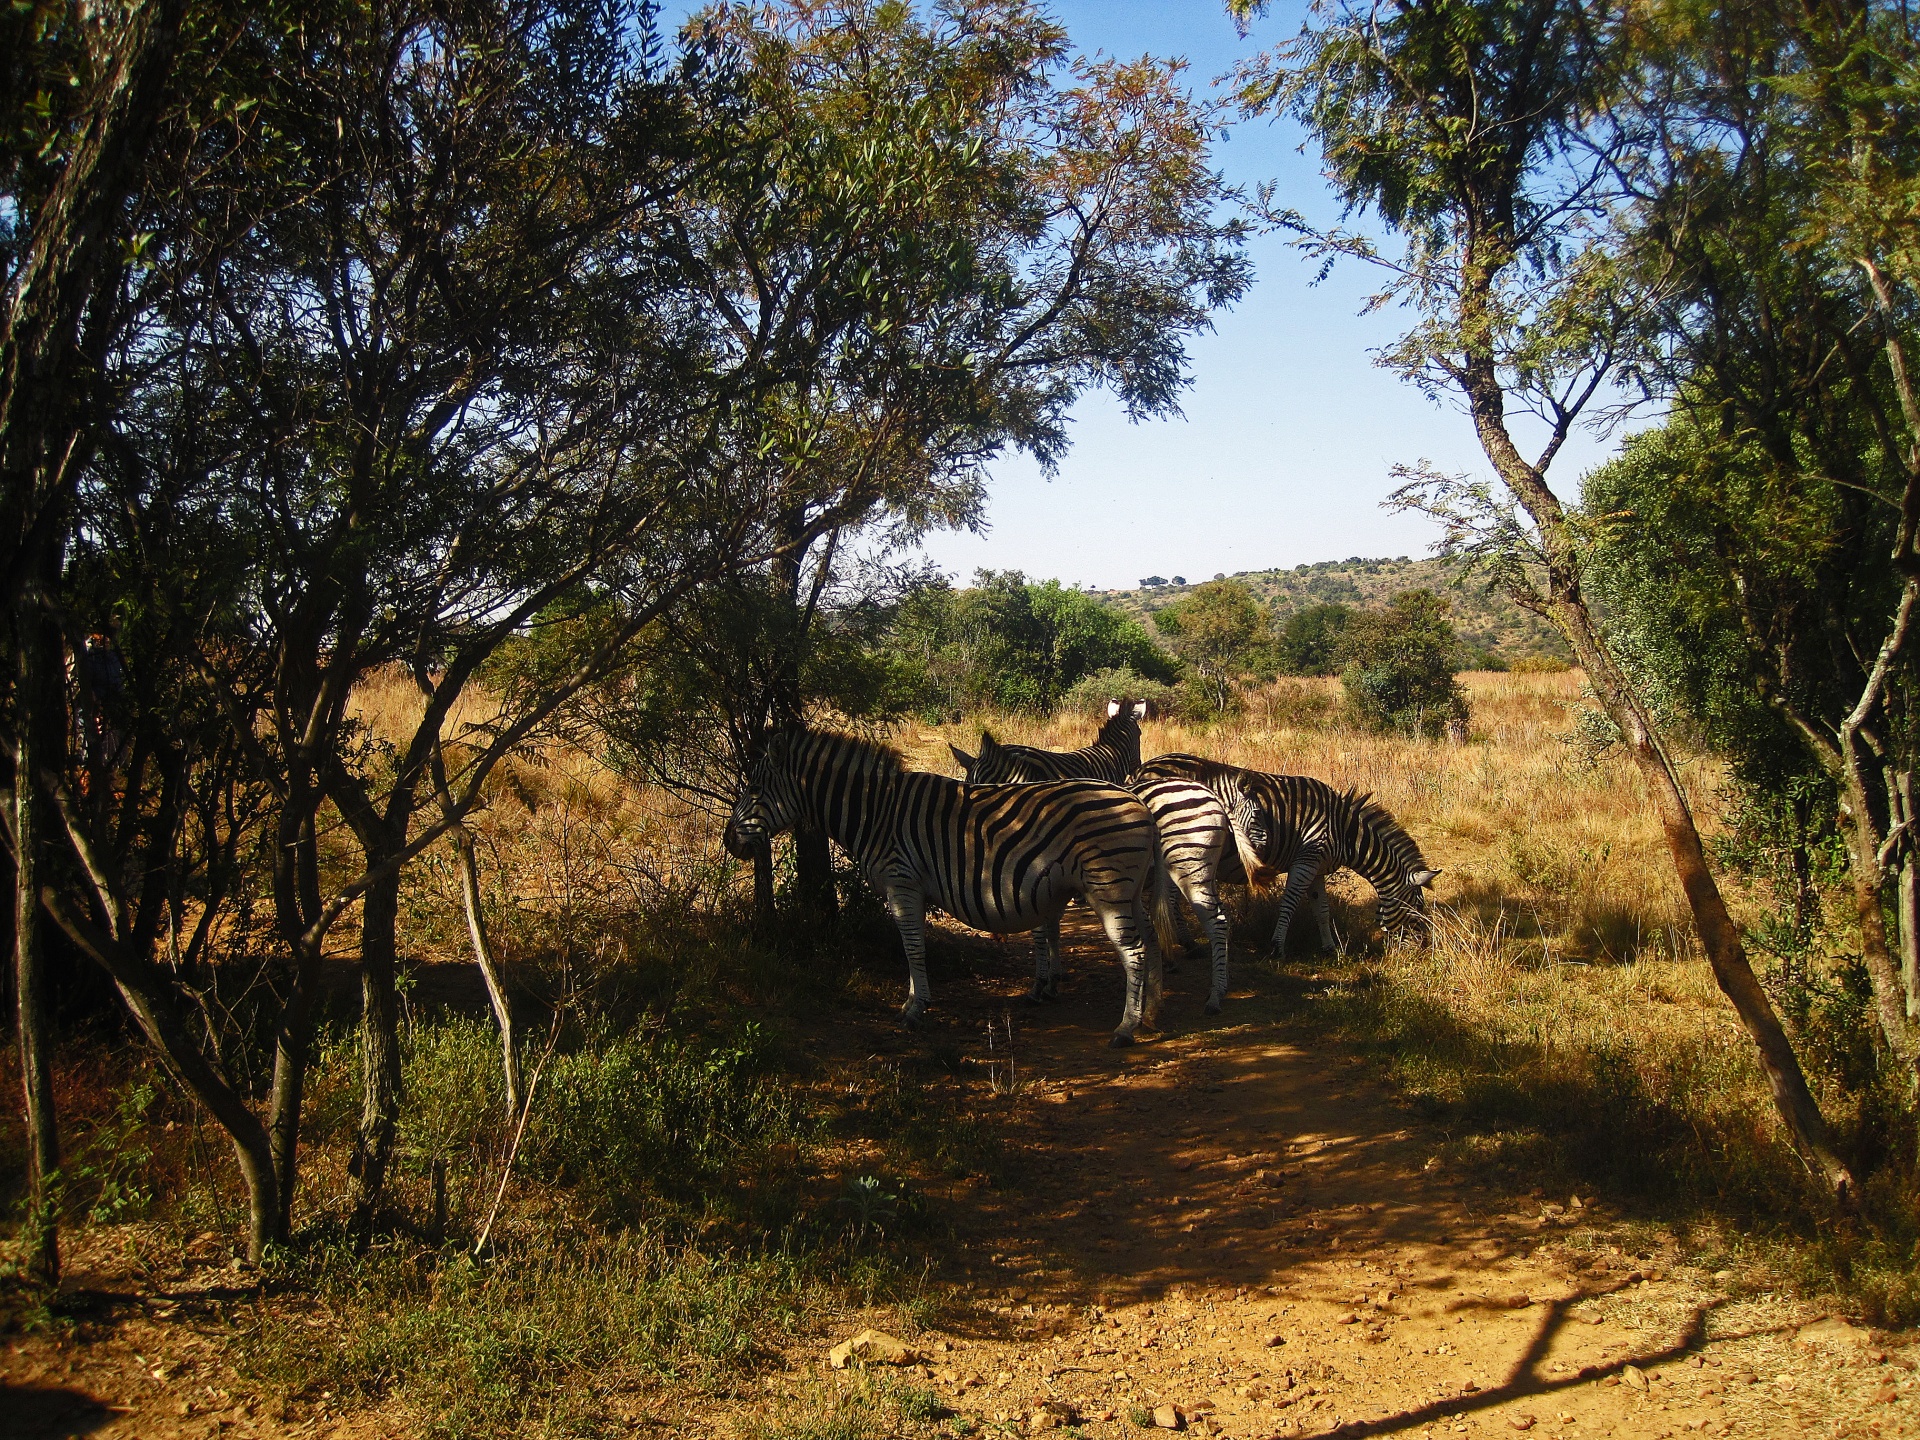 burchell's zebra standing in the shade under trees